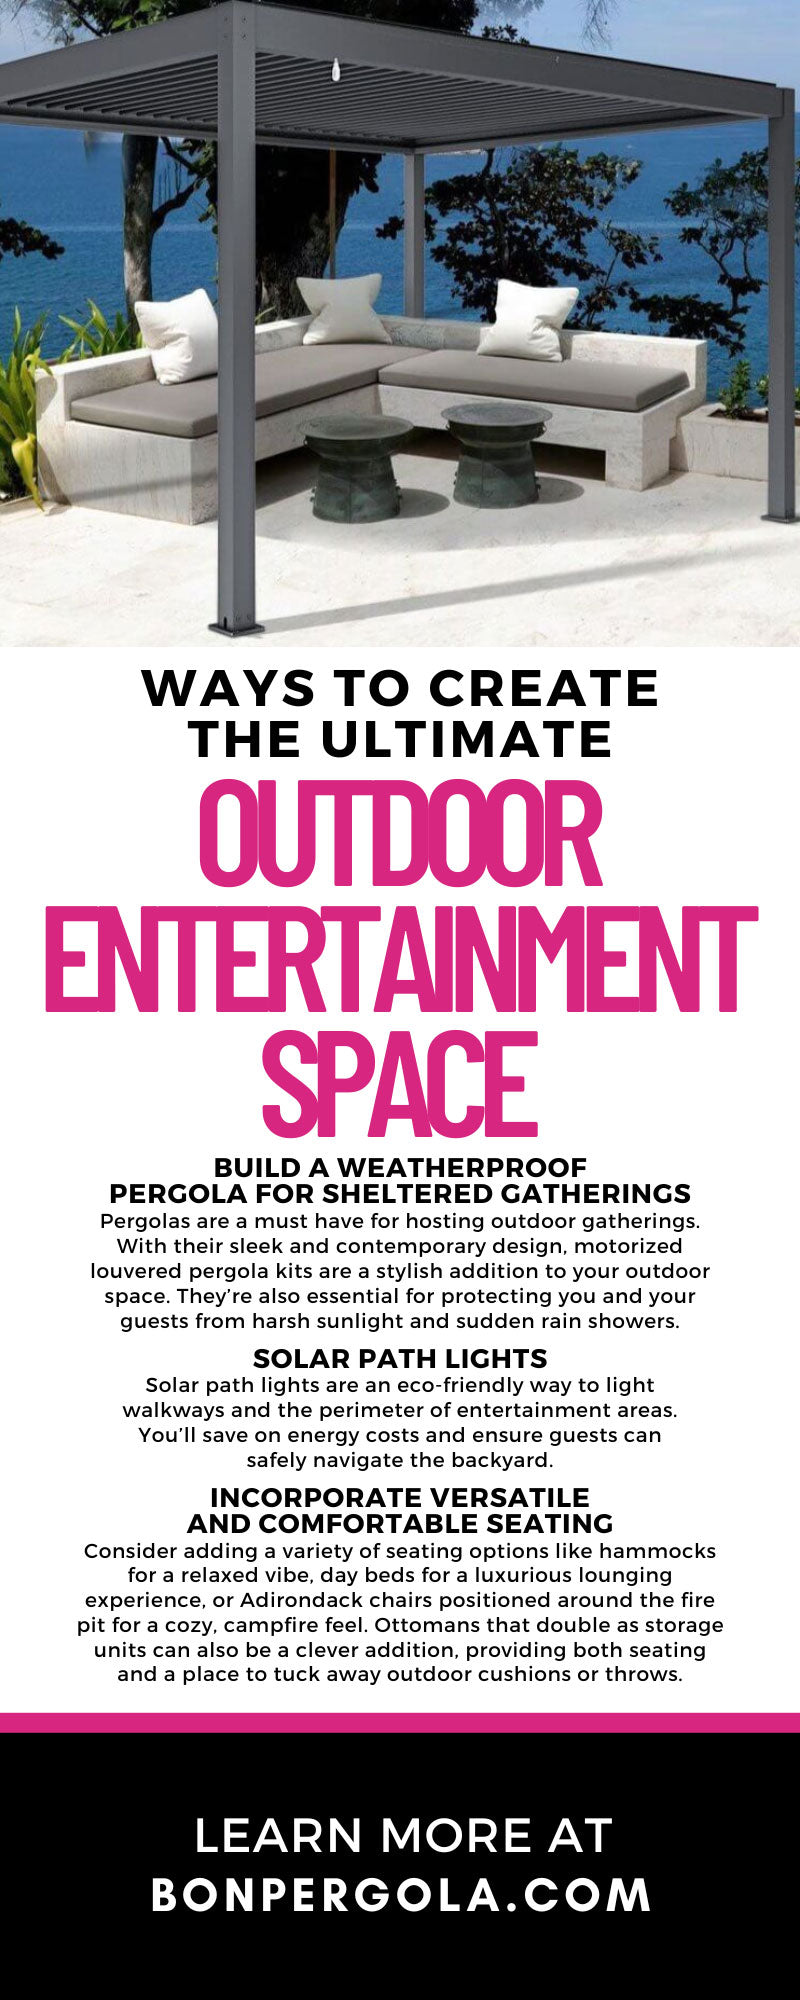 9 Ways To Create the Ultimate Outdoor Entertainment Space